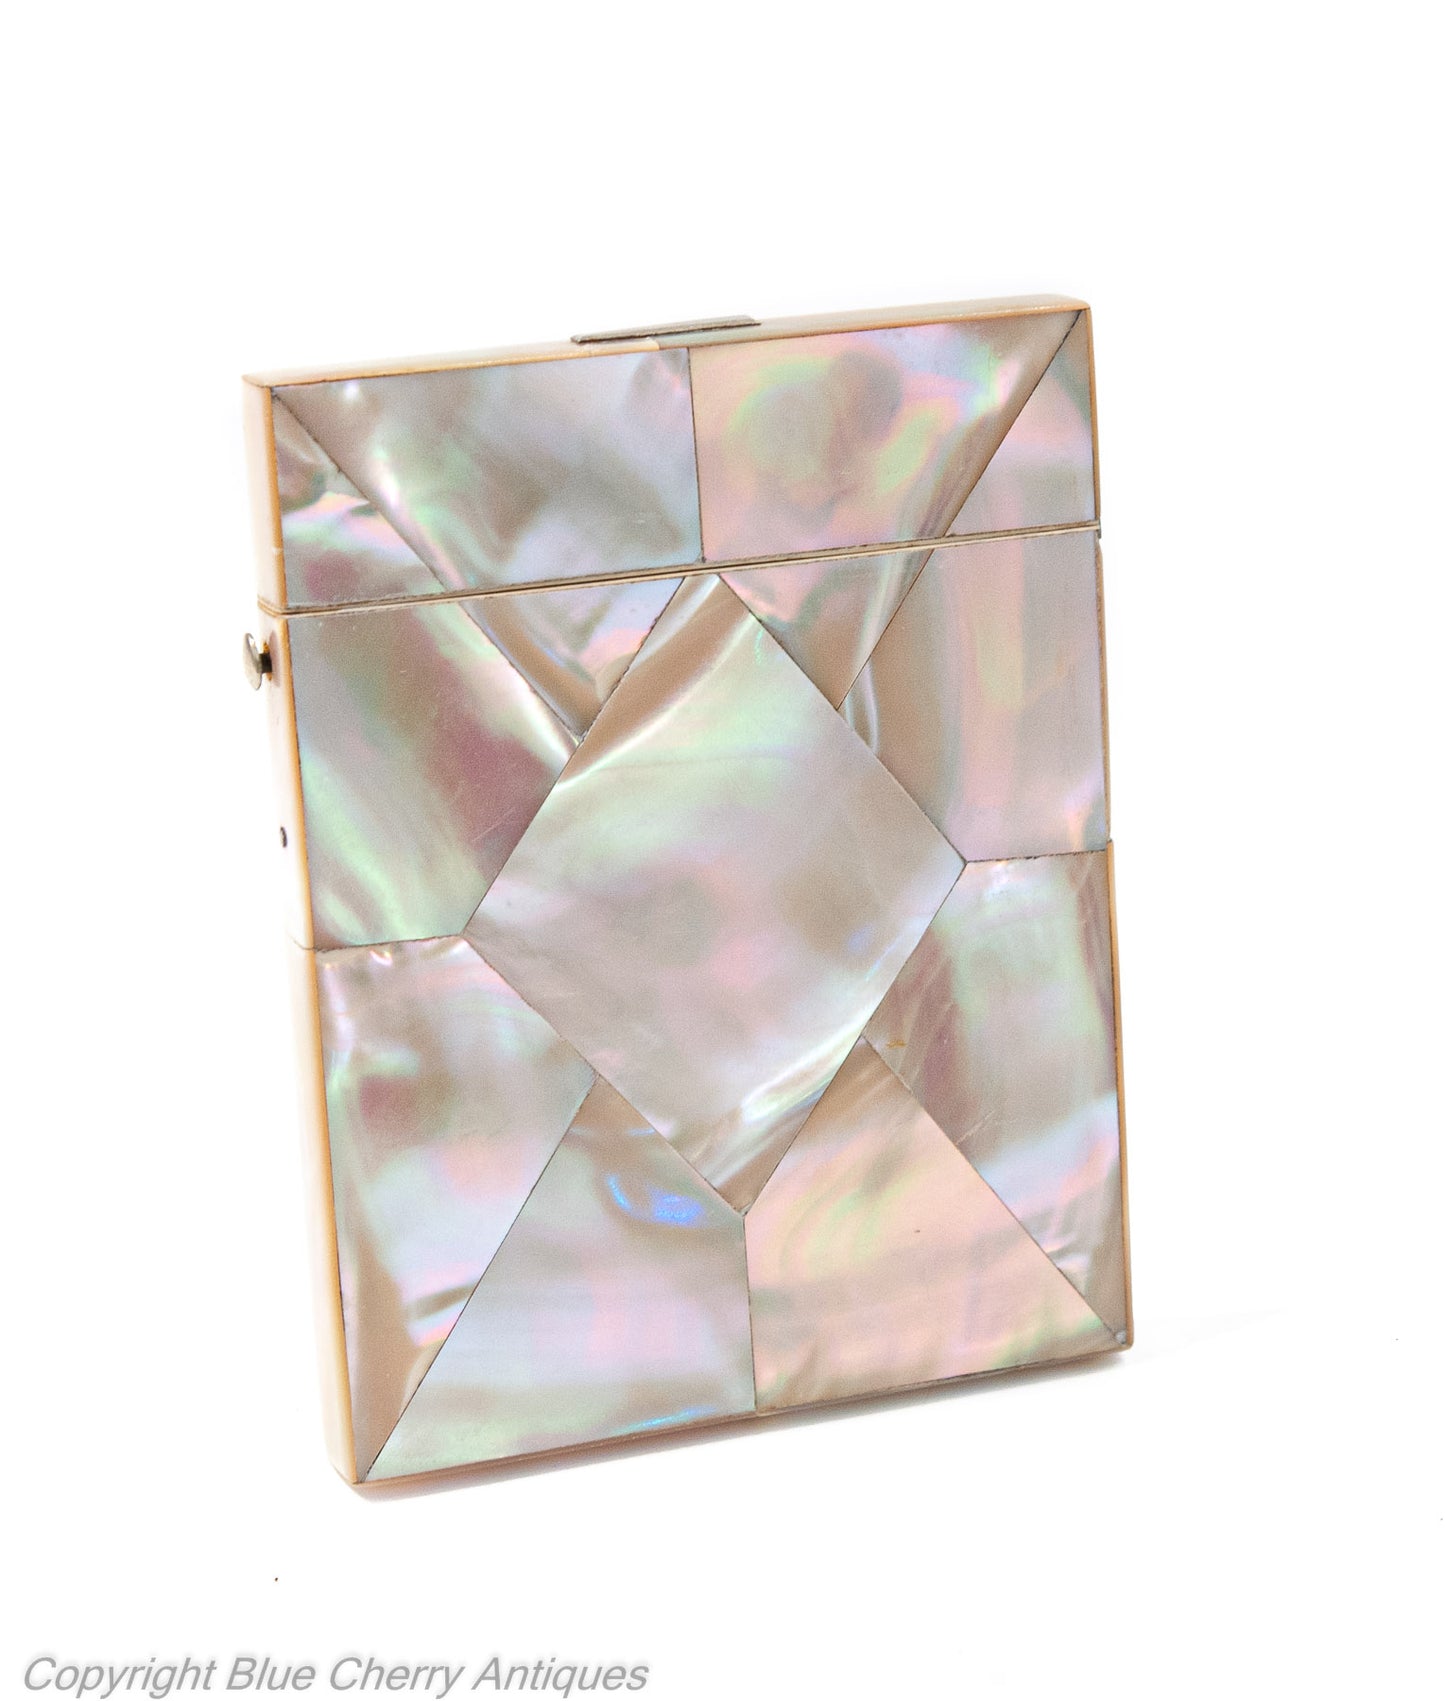 Antique Victorian Mother of Pearl Calling Card Case with Pink Iridescence (Code 1930)